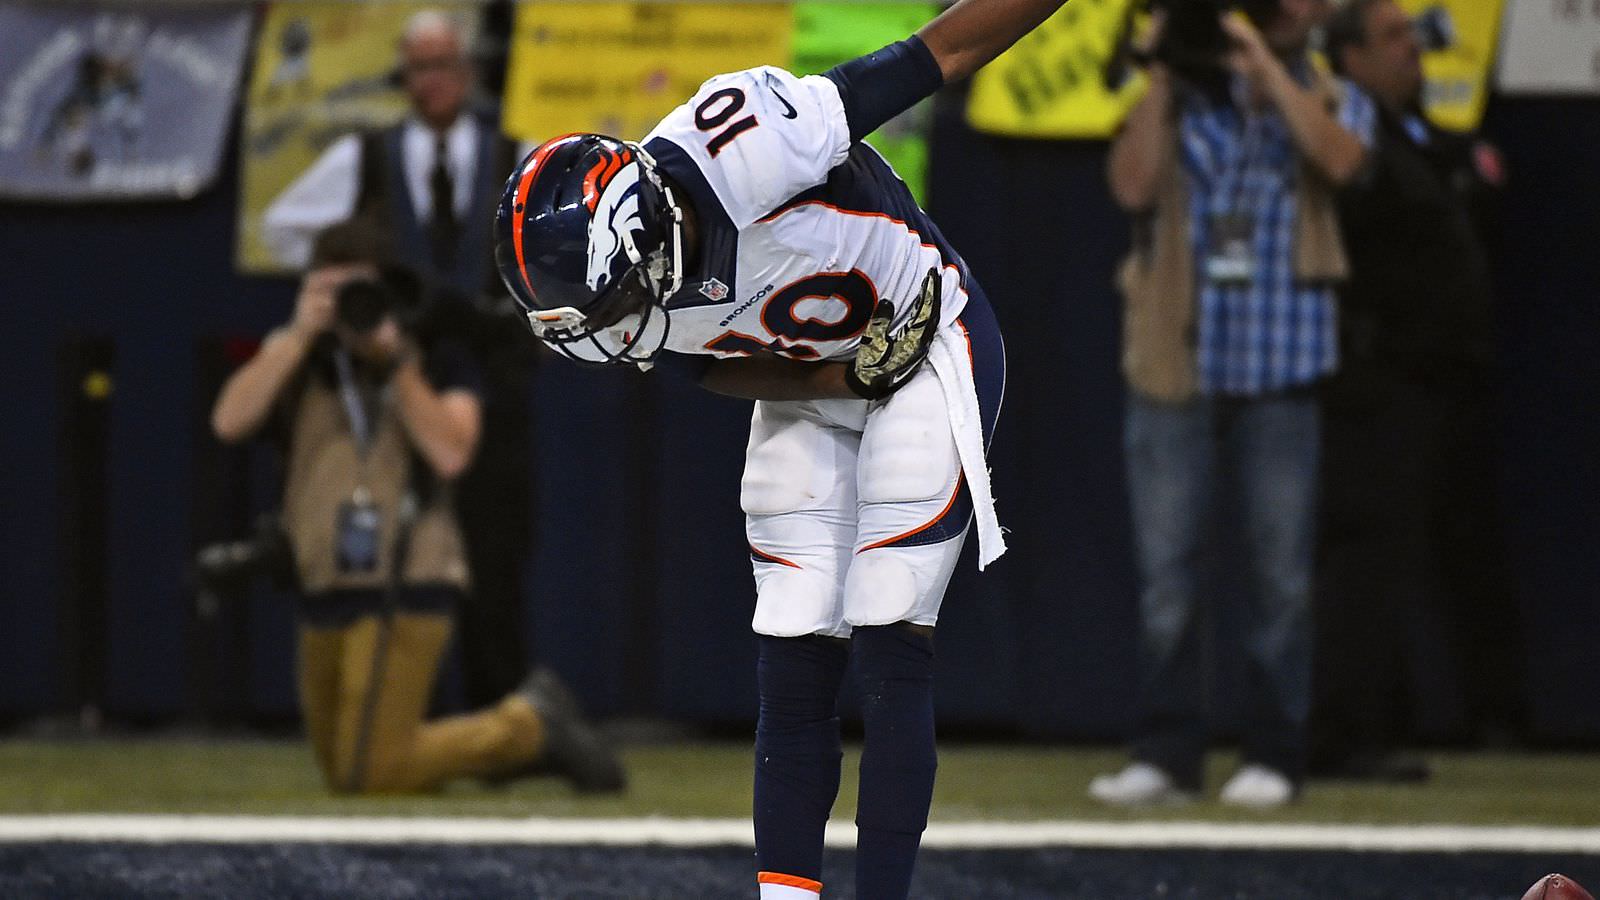 Report: If parted from Denver, Emmanuel Sanders prefers to play